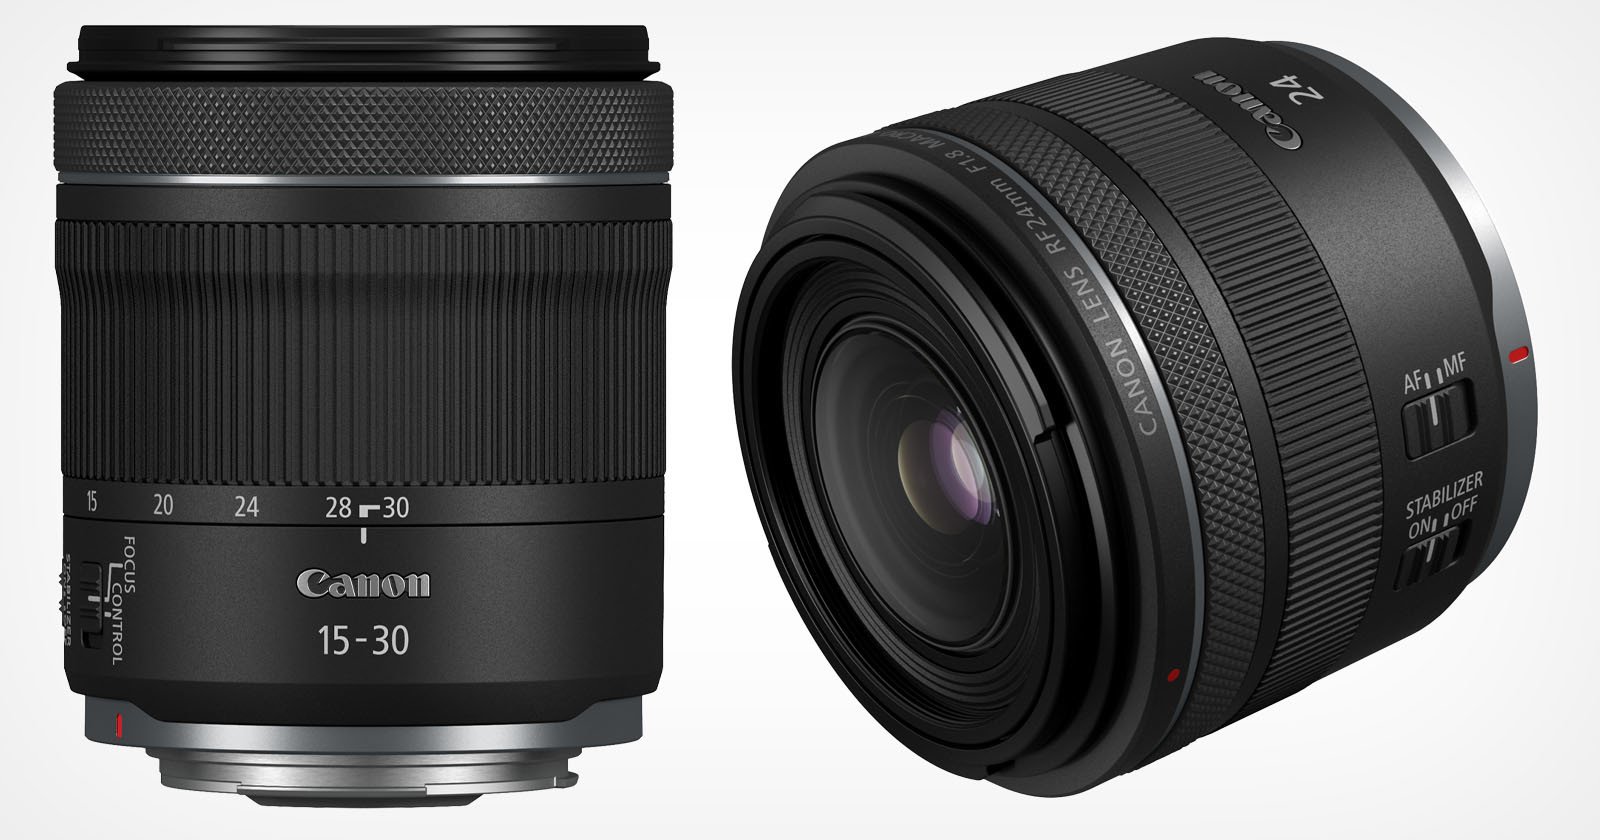 Canon Launches RF 24mm f/1.8 and 15-30mm f/4.5-6.3 Wide Lenses